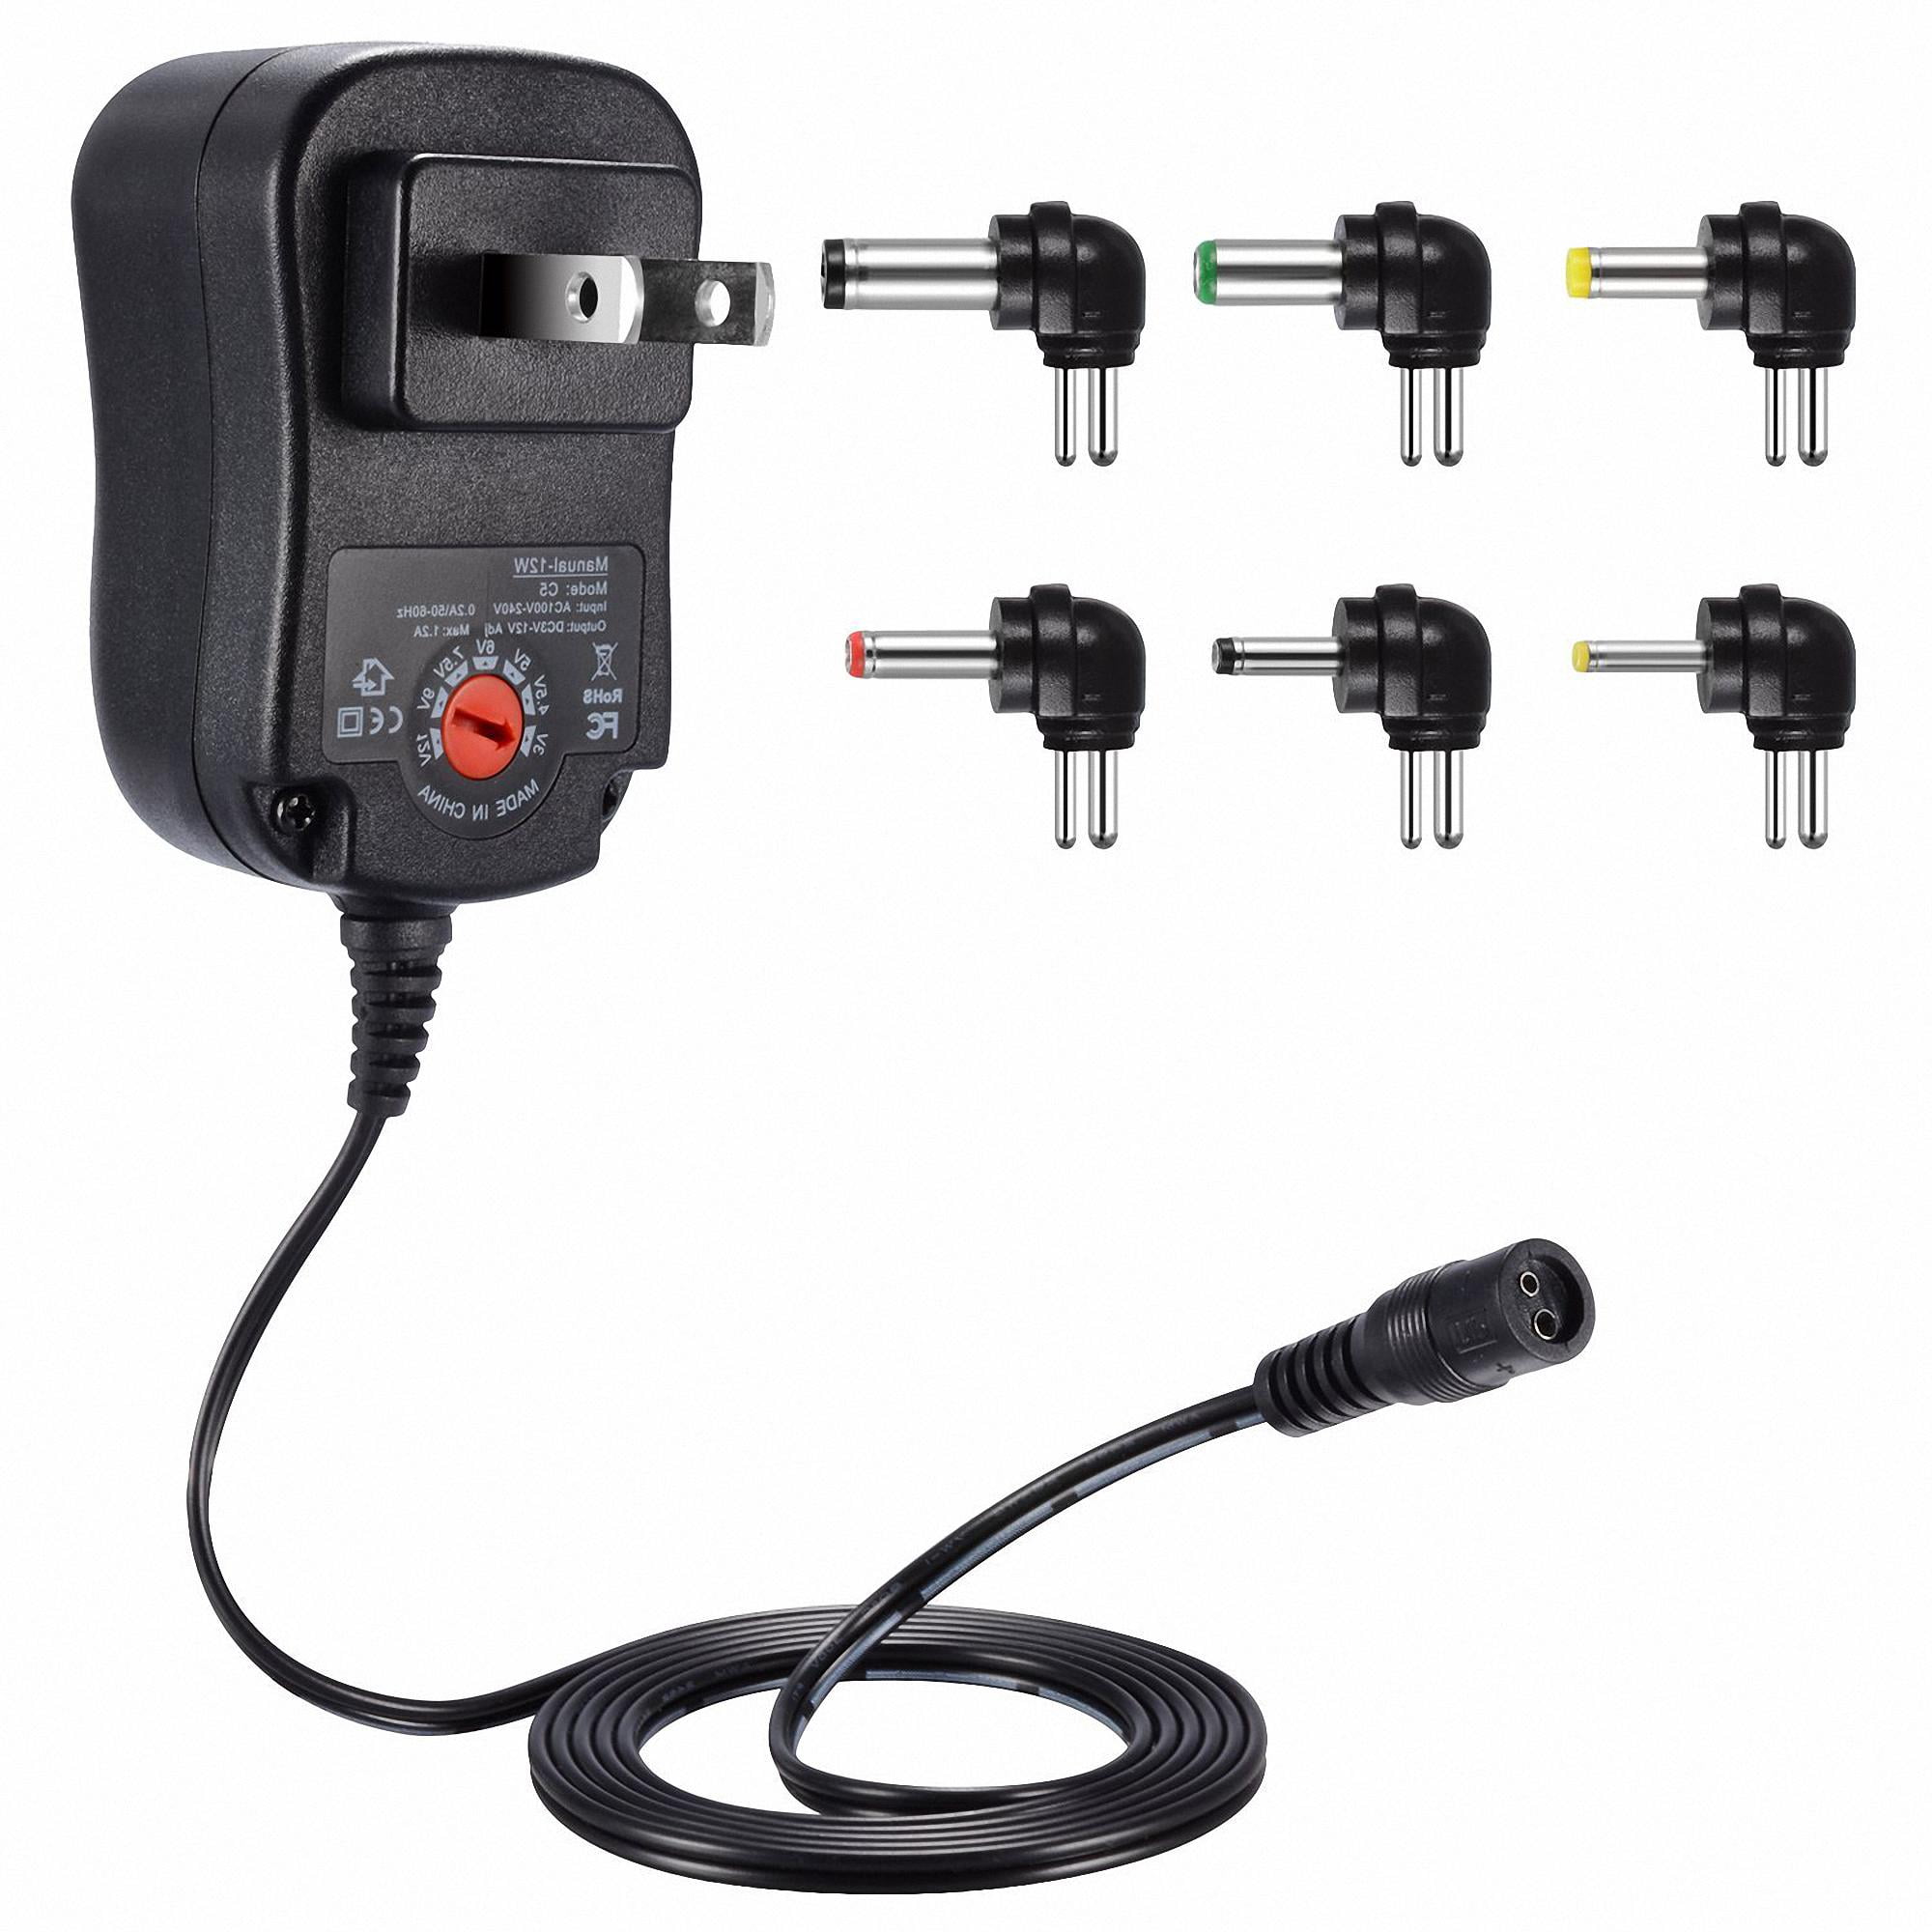 Universal AC/DC Power Supply Adapter and Plug Charger Adapter with 6 Outputs 